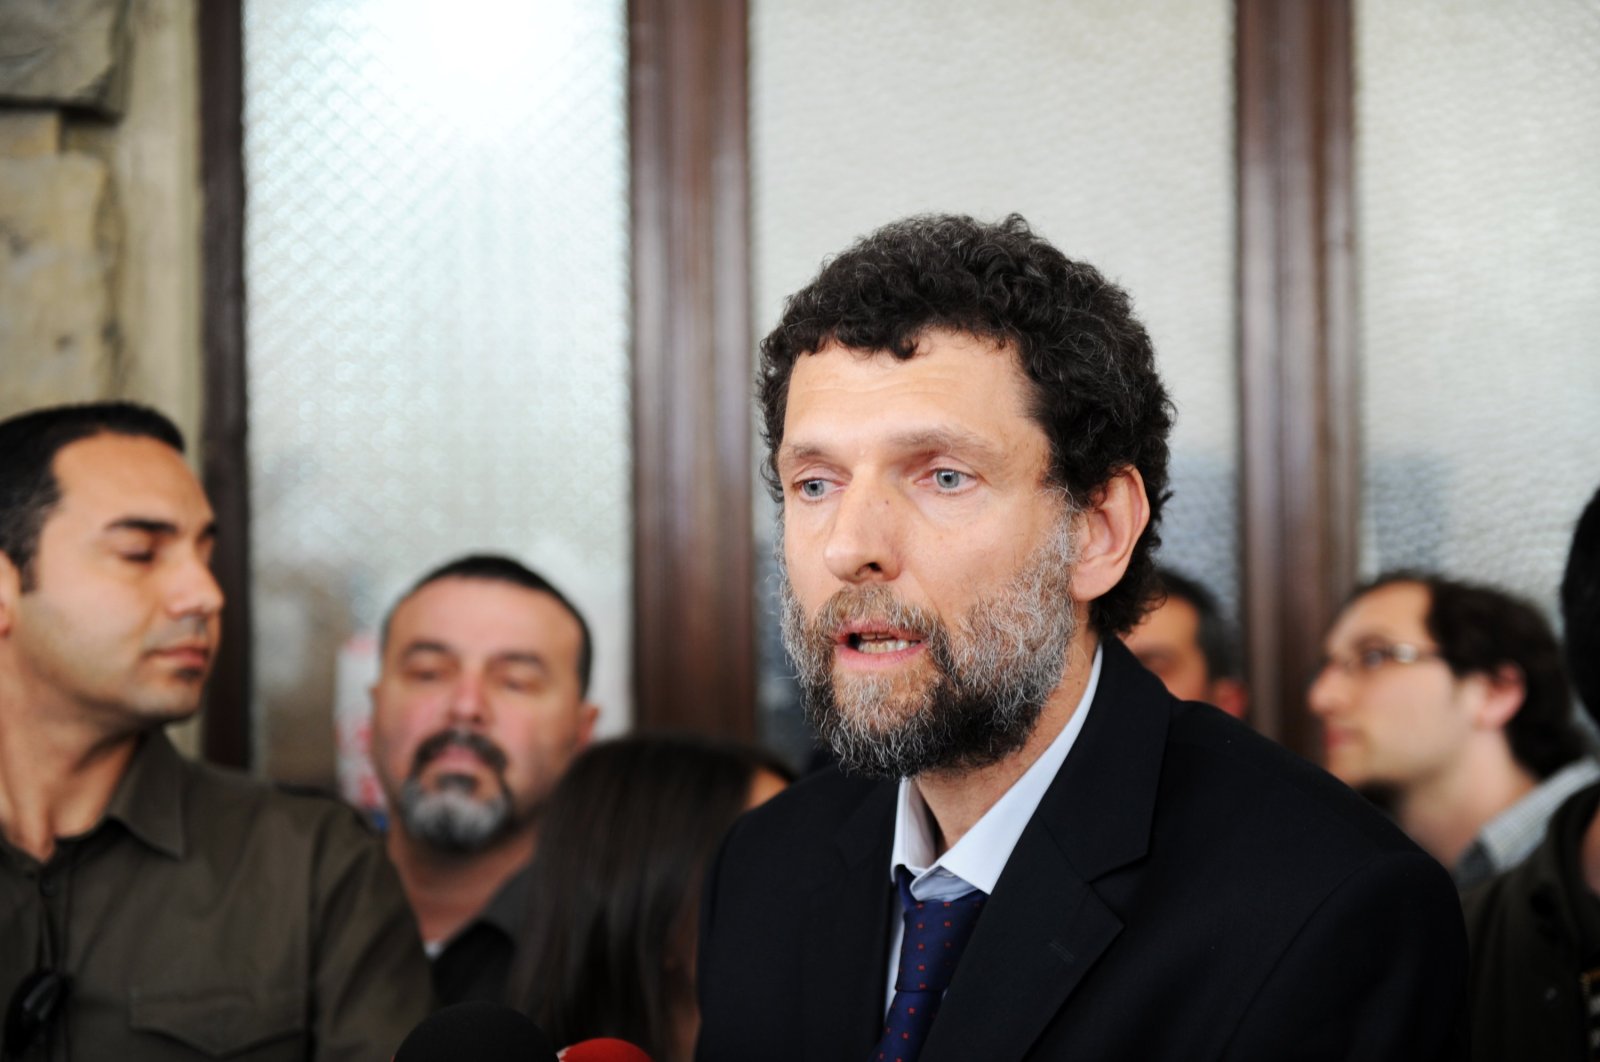 Osman Kavala attends an event in Istanbul, Turkey, April 24, 2010. (iStock Photo)